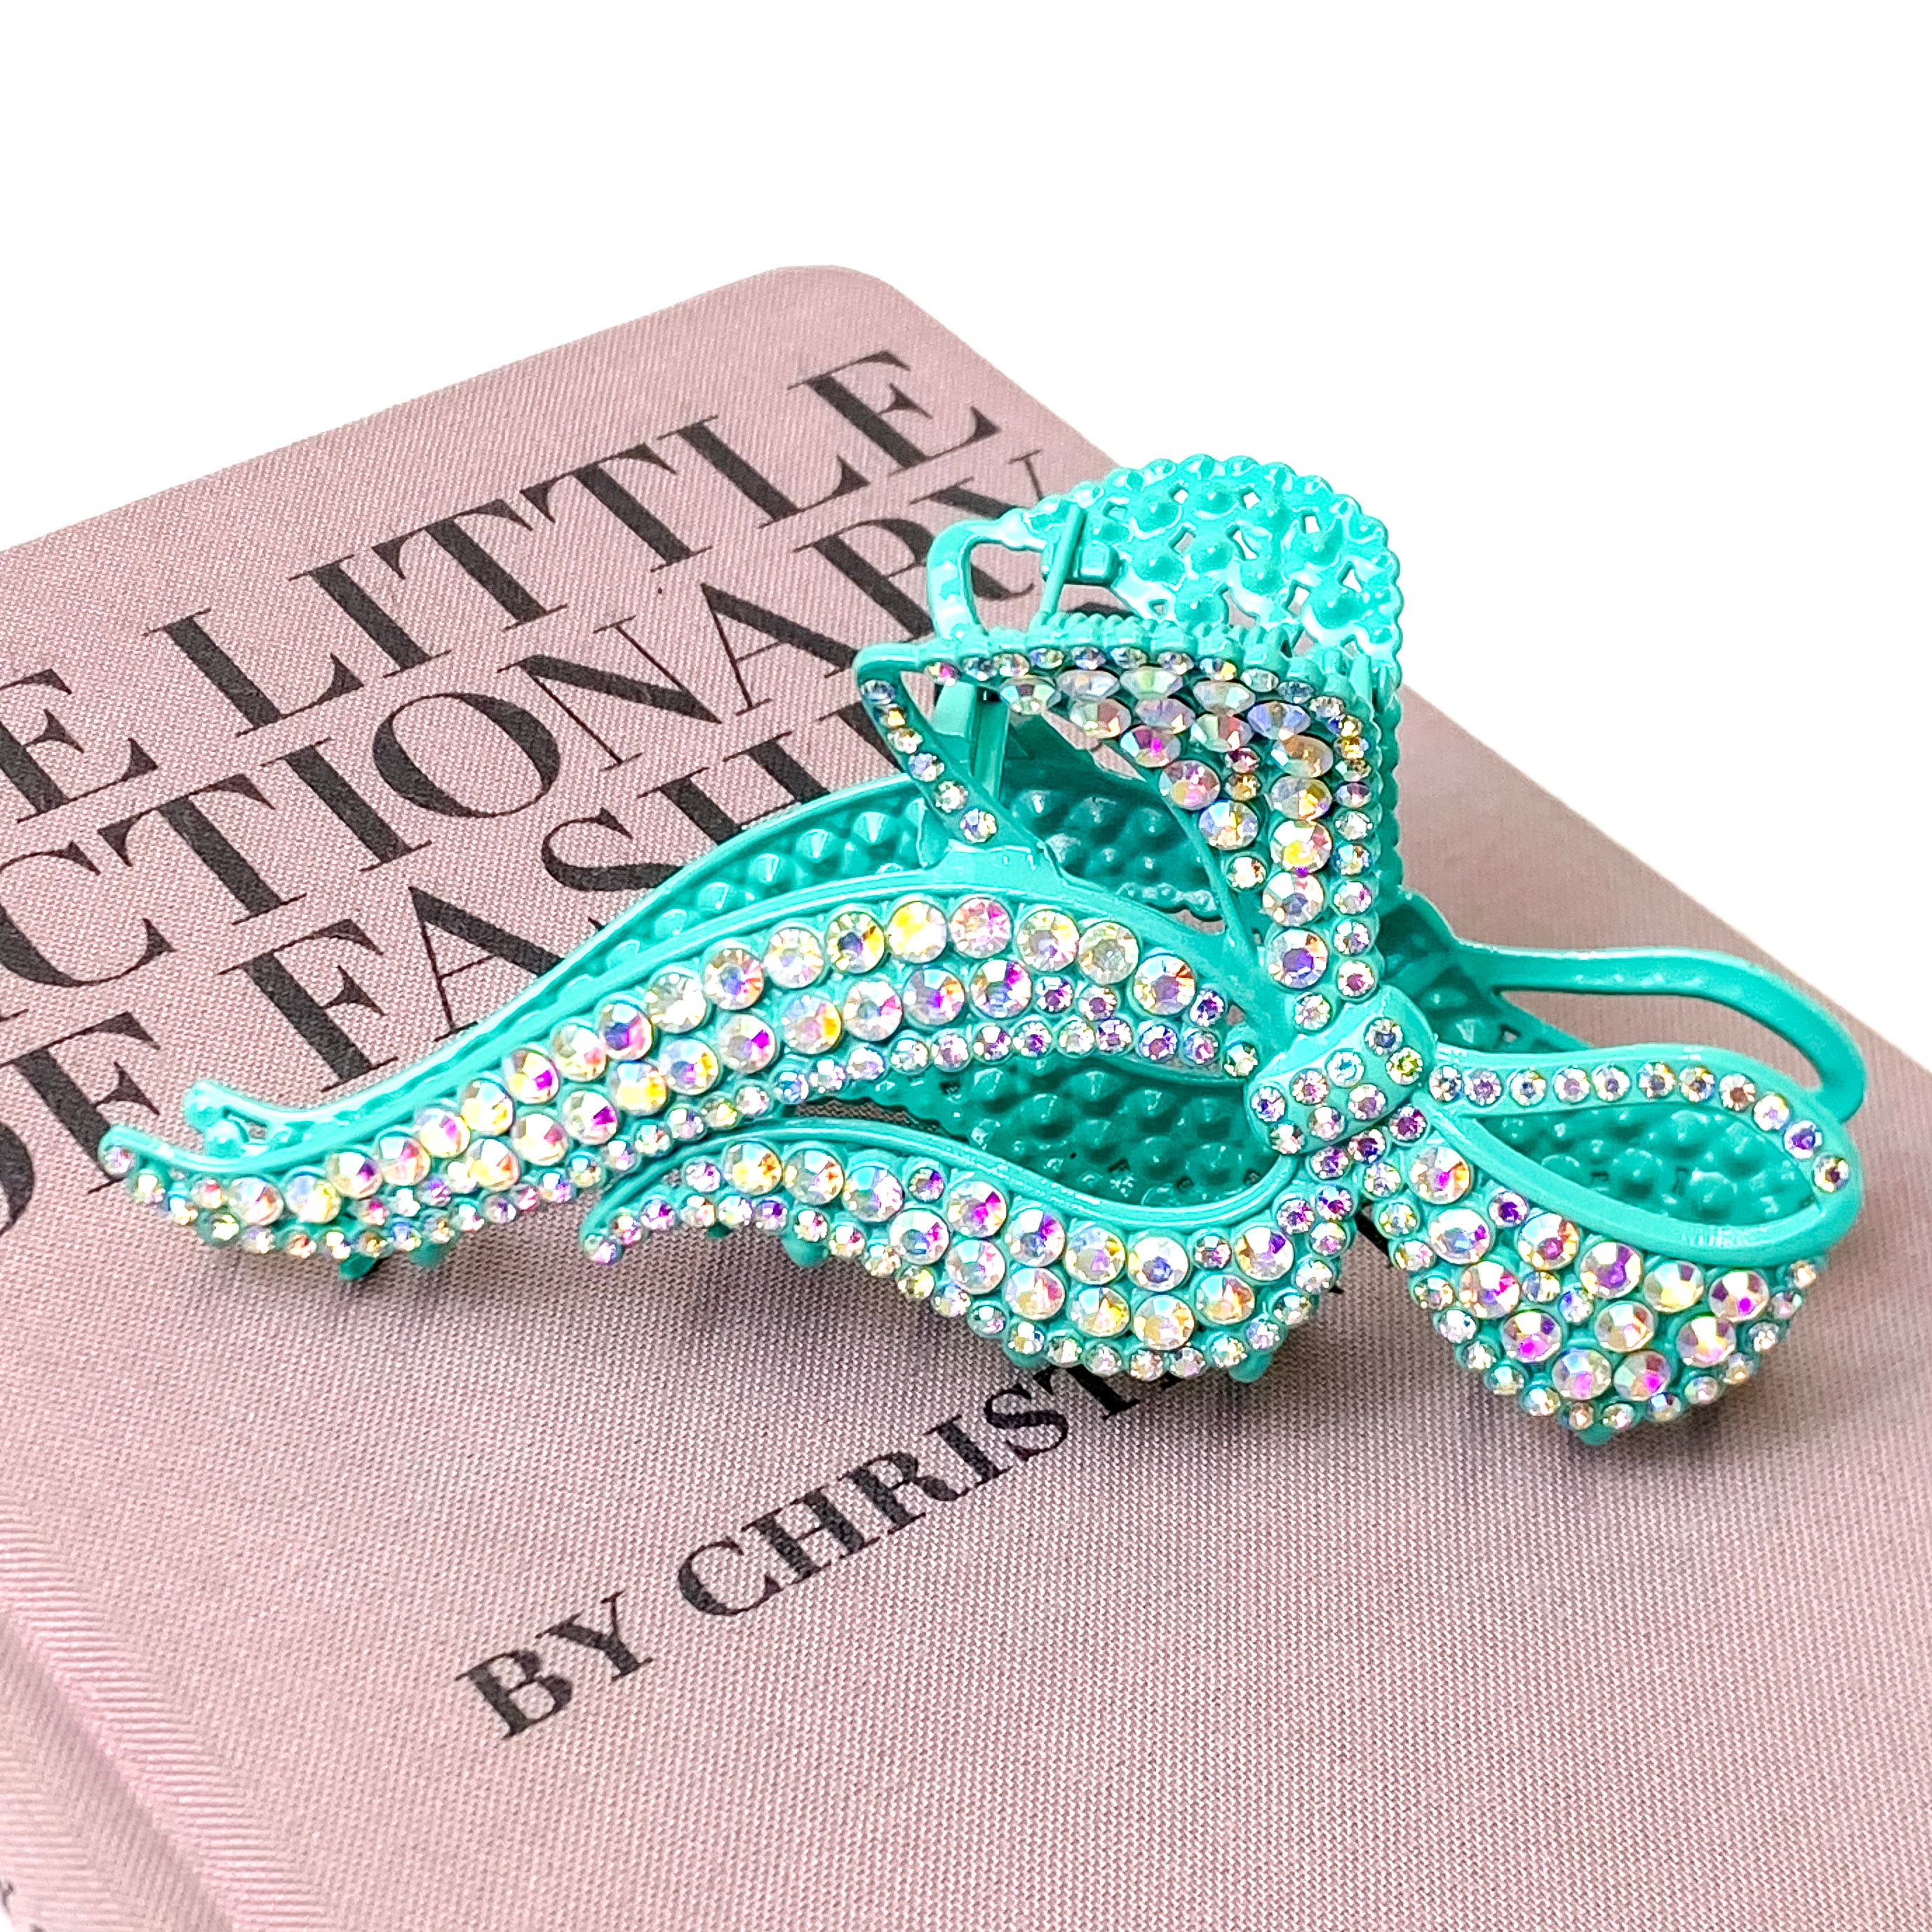 AB Crystal Embellished Bow Shaped Metal Hair Clip in Turquoise Blue - Giddy Up Glamour Boutique